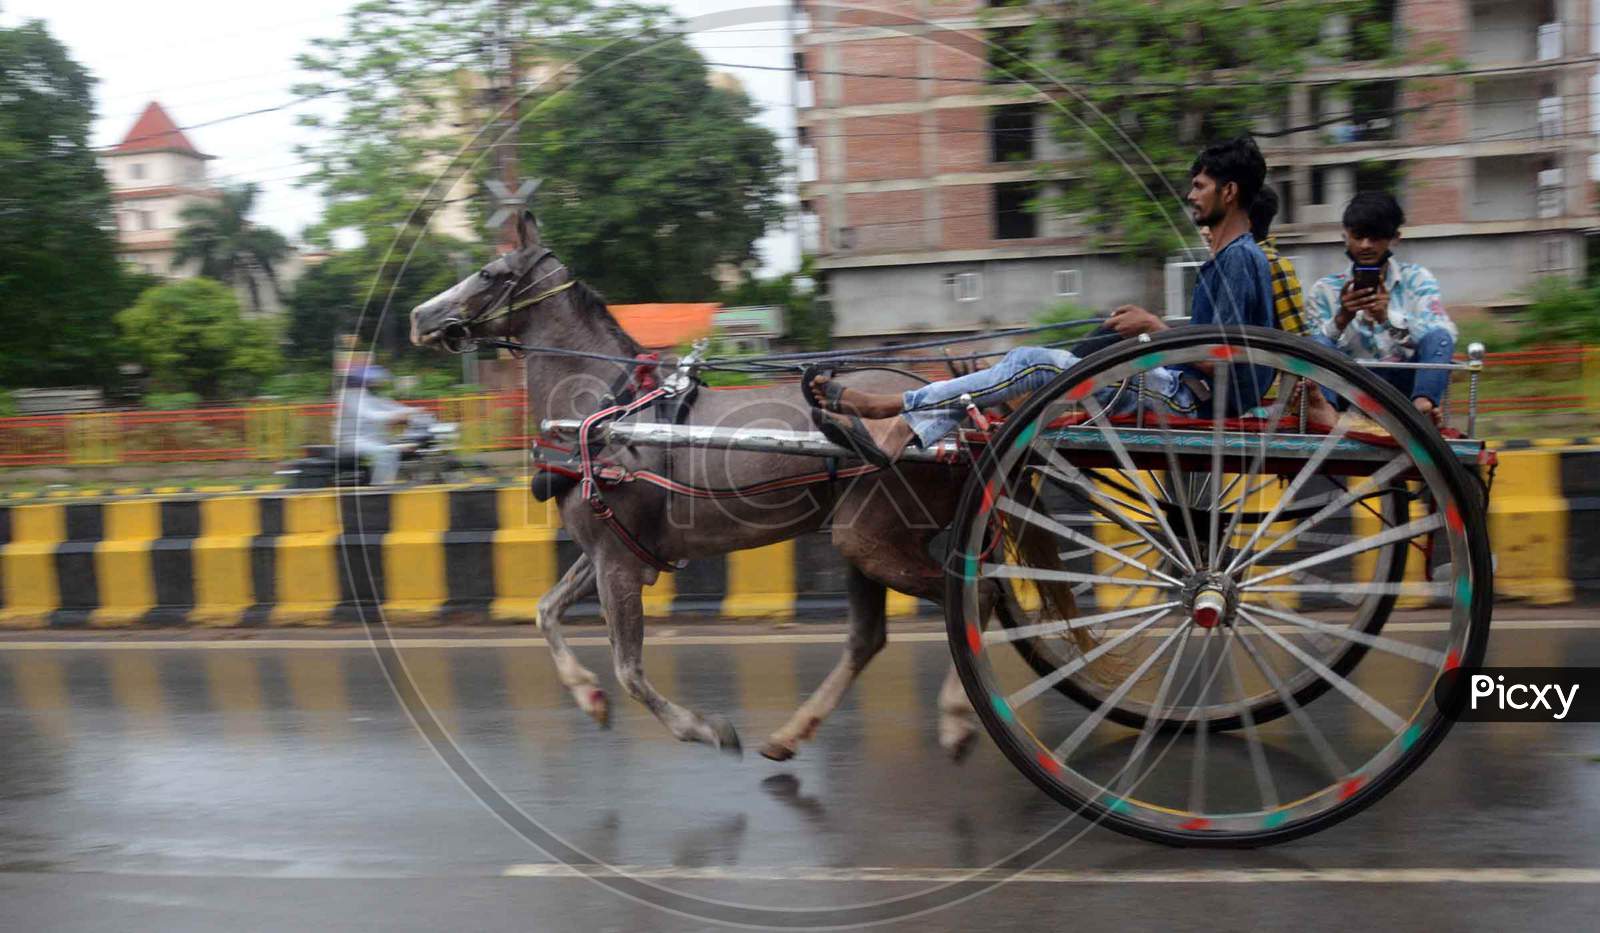 Men participate in an 'Ekka' a horse-drawn cart race on the first Monday of the holy month of Shravan in Prayagraj, Uttar Pradesh on July 06, 2020